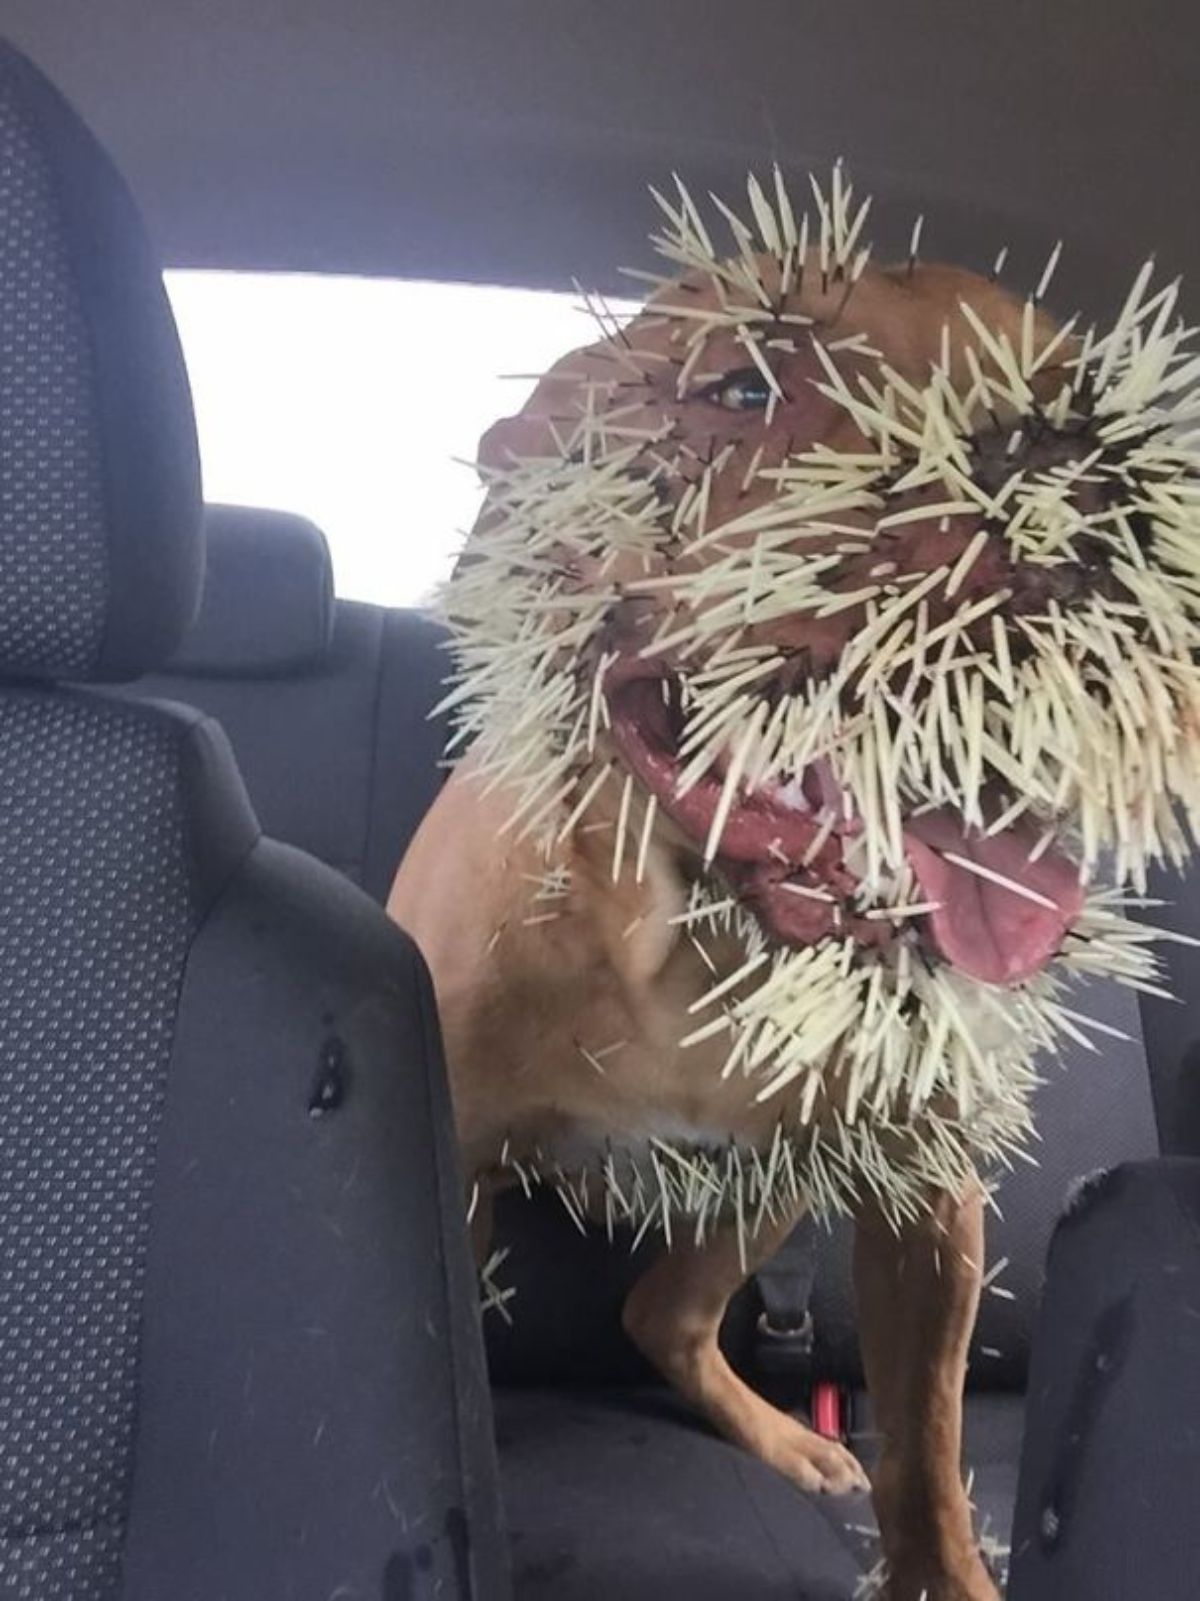 brown dog sitting in a vehicle with many porcupine quills stuck on the face and body